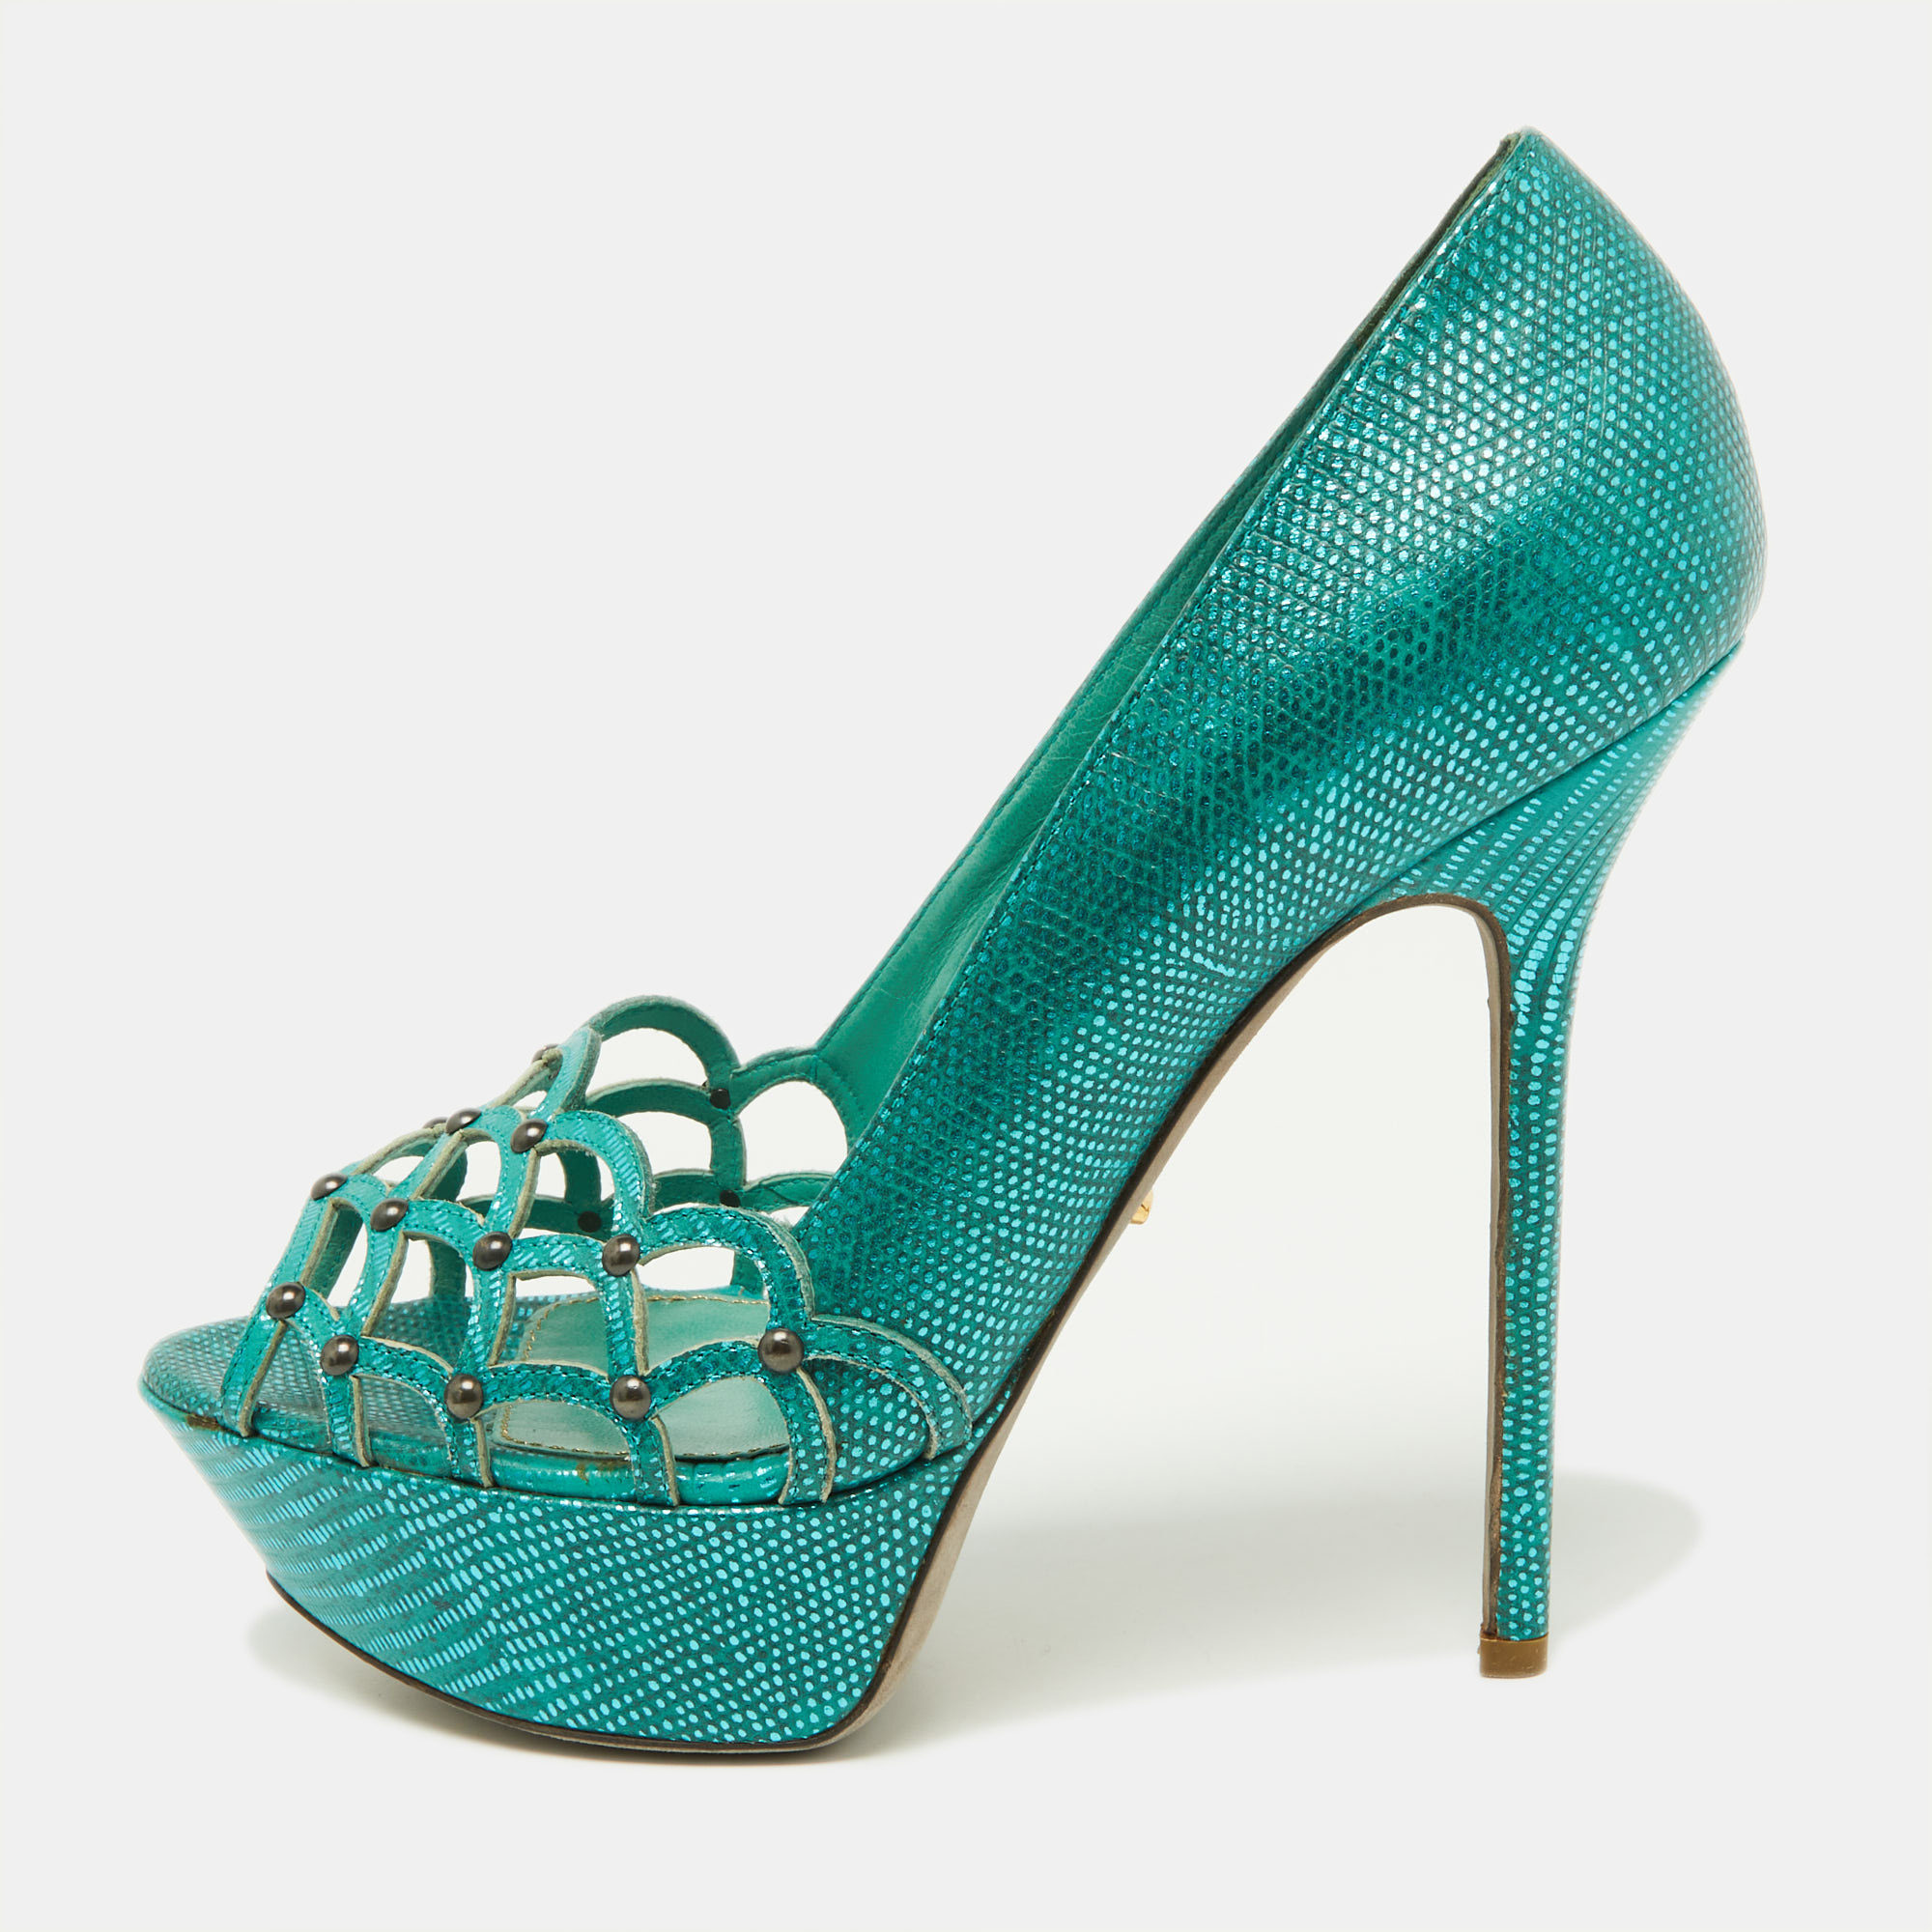 Adorned with intricate laser cuts this pair of Sergio Rossi pumps perfectly pairs fashion and function. It is crafted from leather in a green shade and it makes for a delightful creation. The 14cm heels and platforms of this pair will lend you stylish steps.